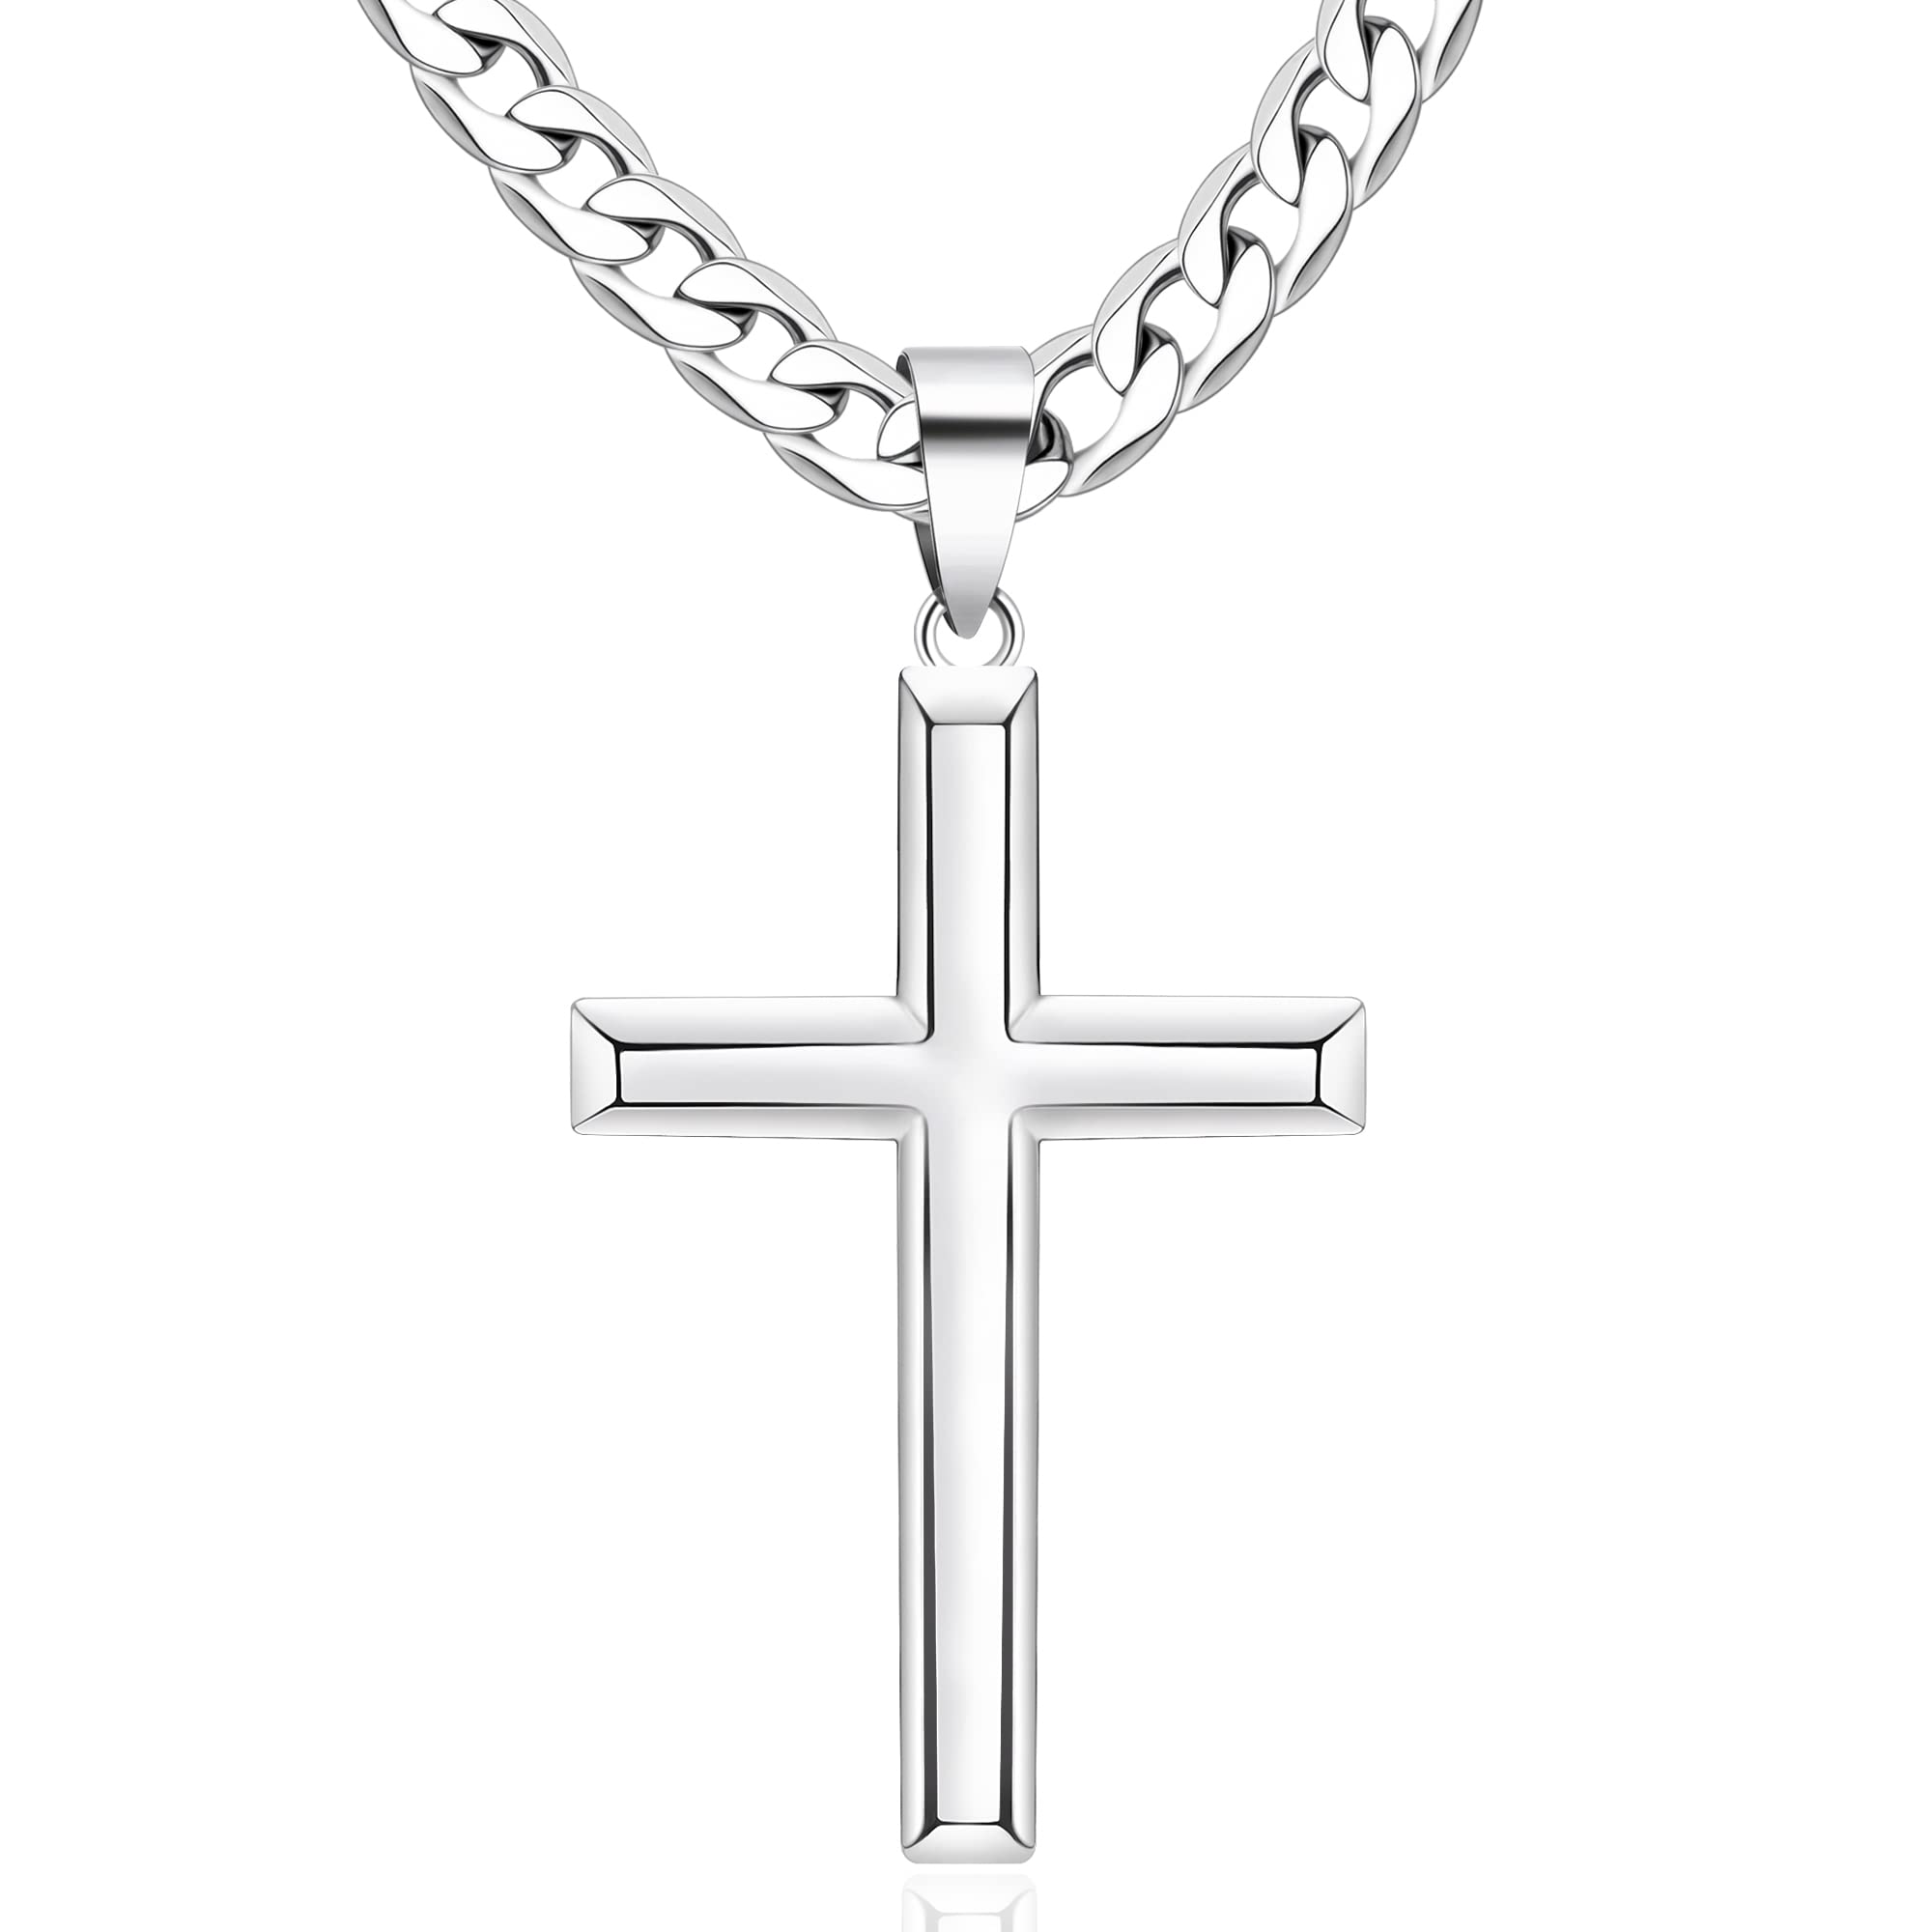 Cameido 925 Sterling Silver Cross Necklace for Men Women Stainless Steel Men's Diamond-Cut Solid Curb Cuban Link Chain Big Beveled Edge Crucifix Cross Pendant Necklace Highly Polished Silver Cross Pendant Necklace 16-28 Inches